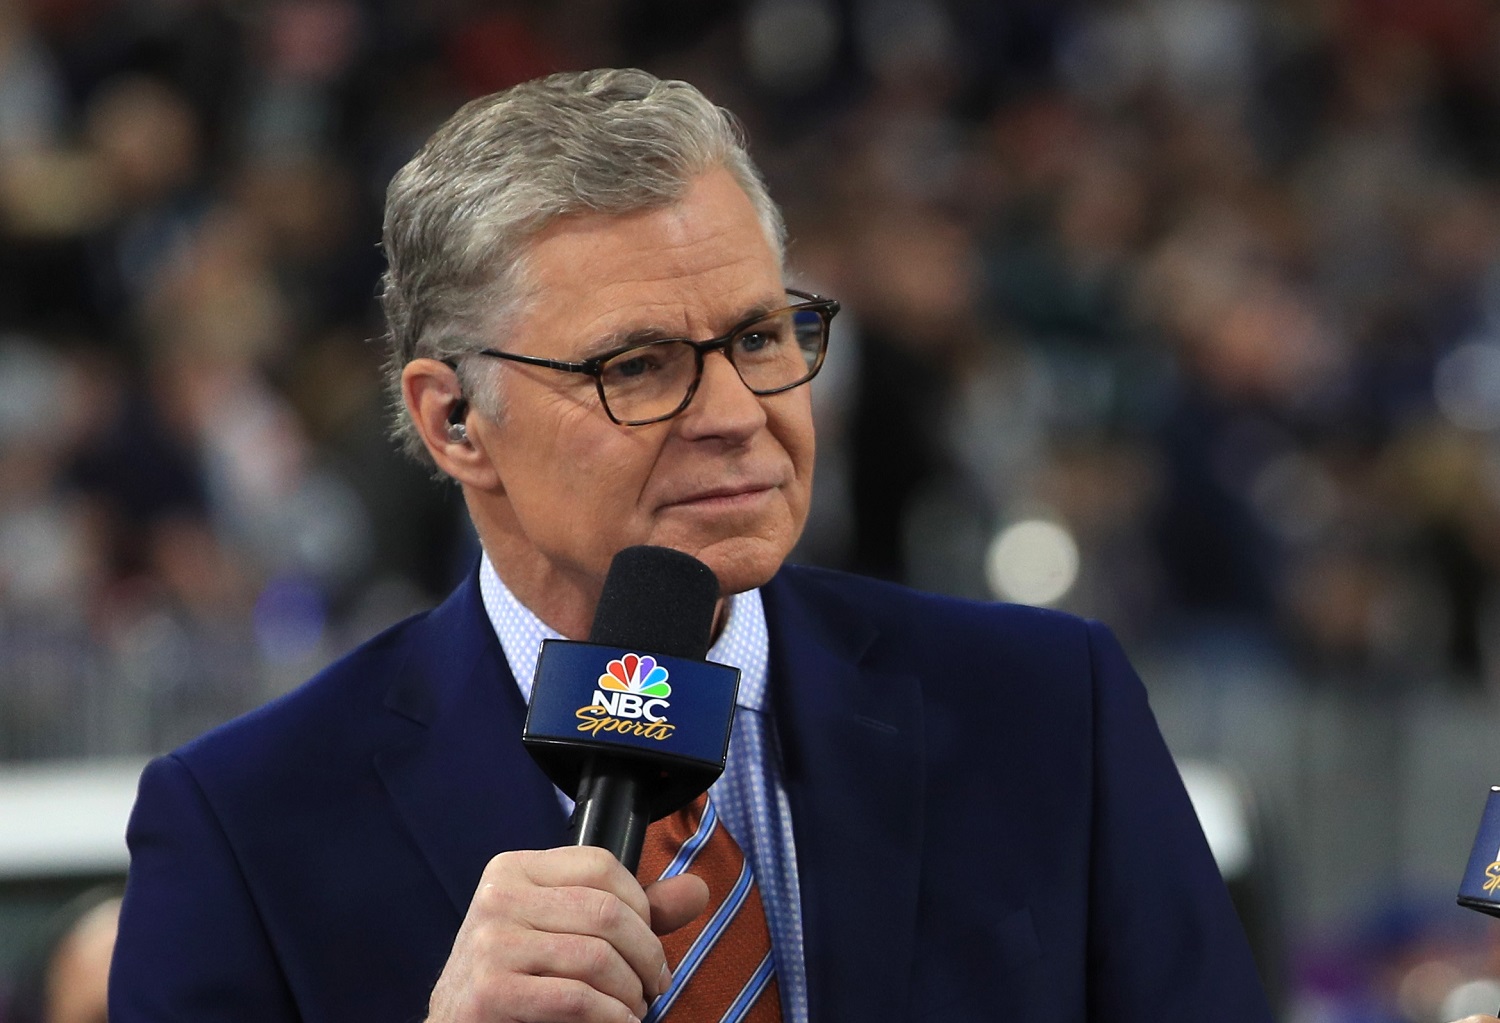 Dan Patrick enjoyed long rides at ESPN and NBC before deciding in 2018 to focus on his daily radio show. | Mike Ehrmann/Getty Images